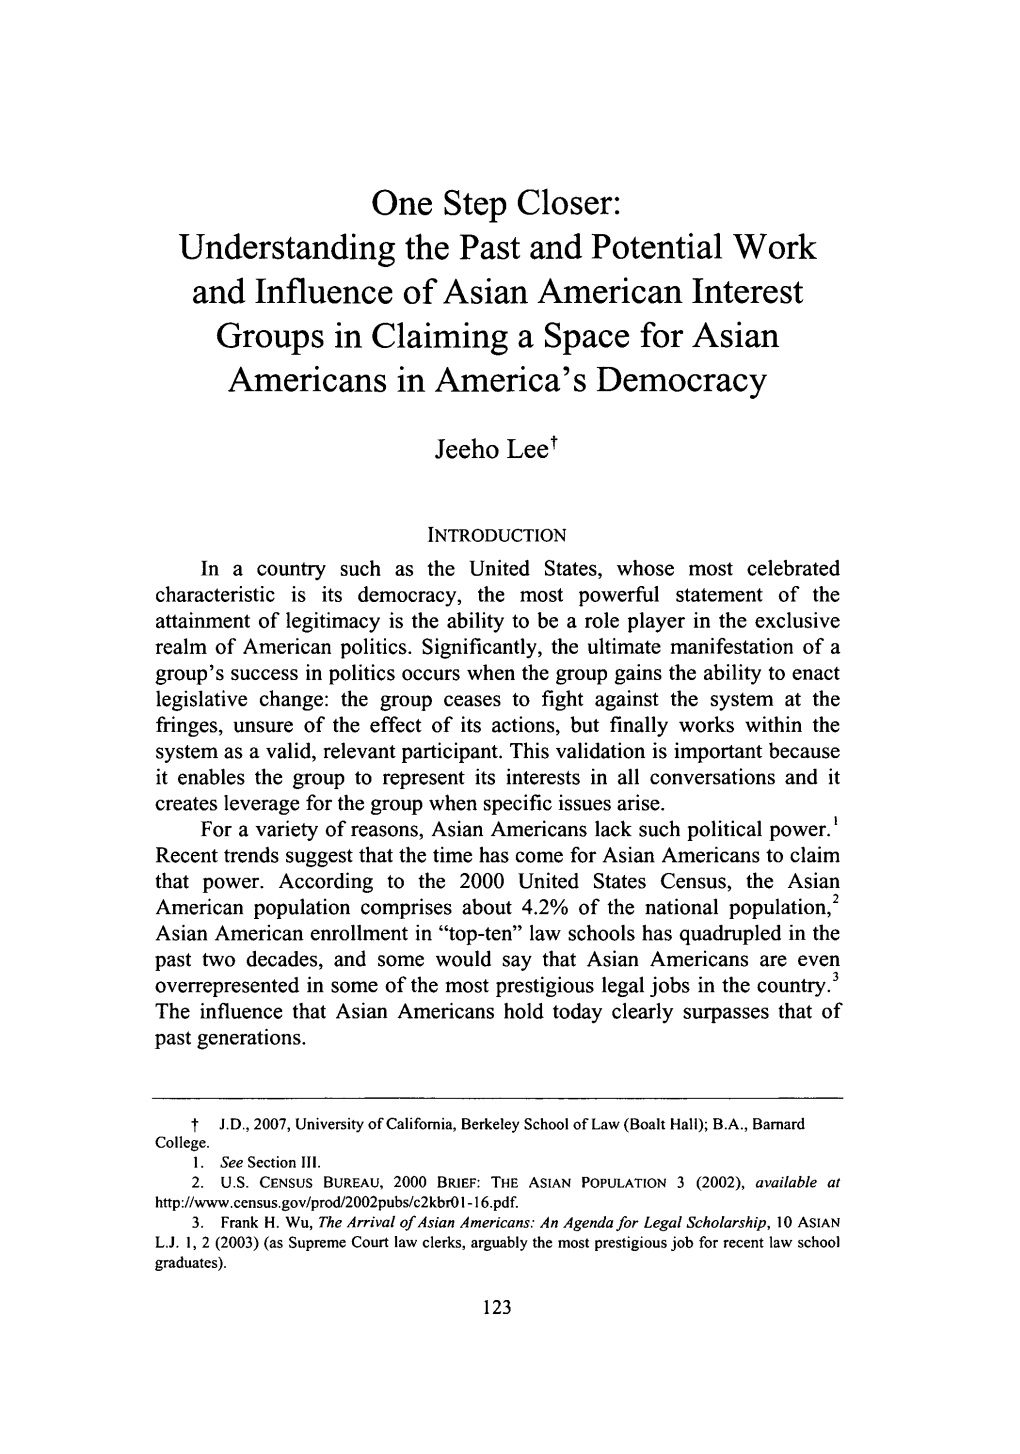 Understanding the Past and Potential Work and Influence of Asian American Interest Groups in Claiming a Space for Asian Americans in America's Democracy